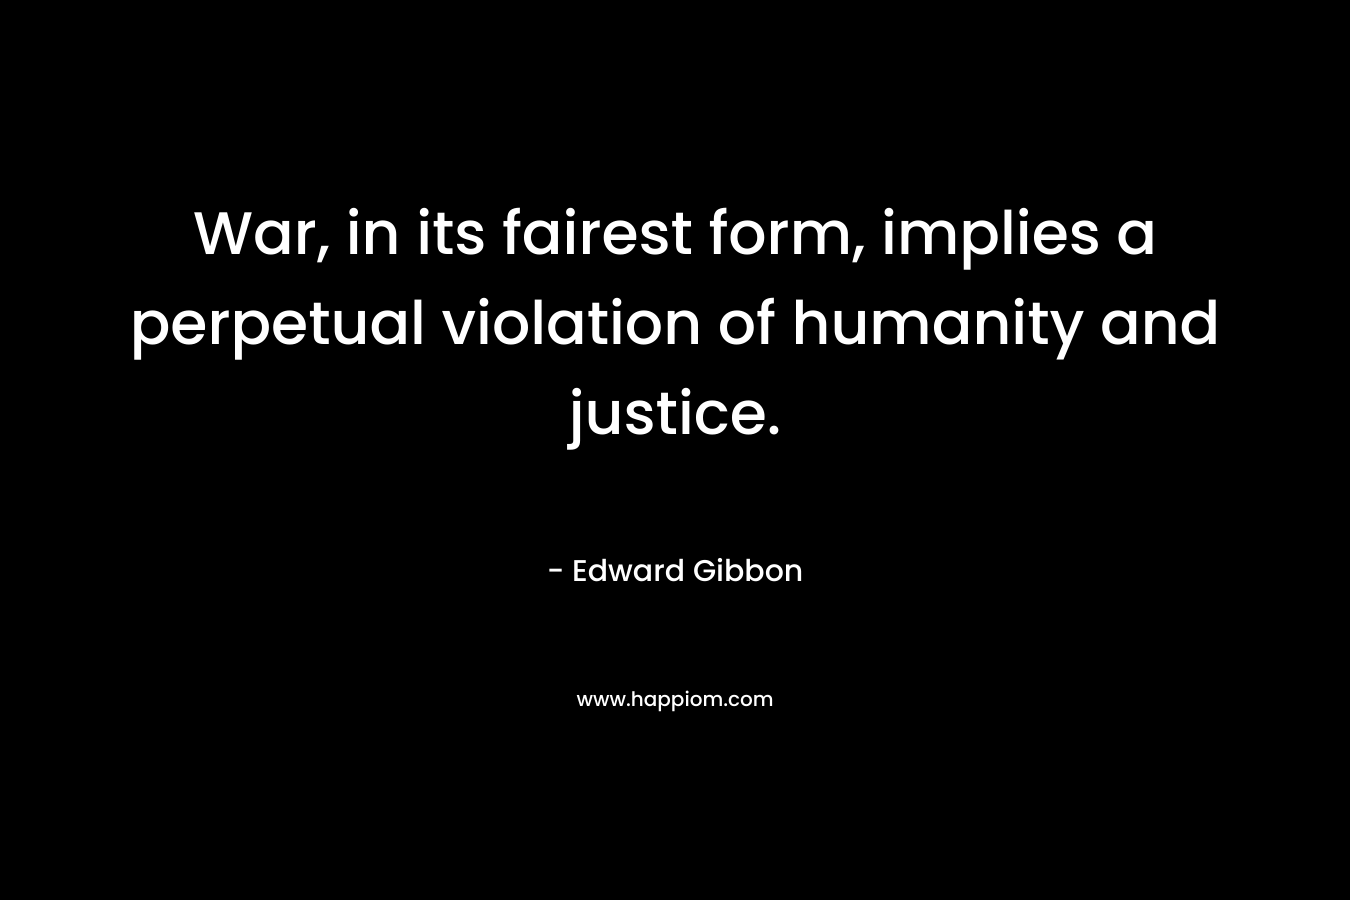 War, in its fairest form, implies a perpetual violation of humanity and justice. – Edward Gibbon